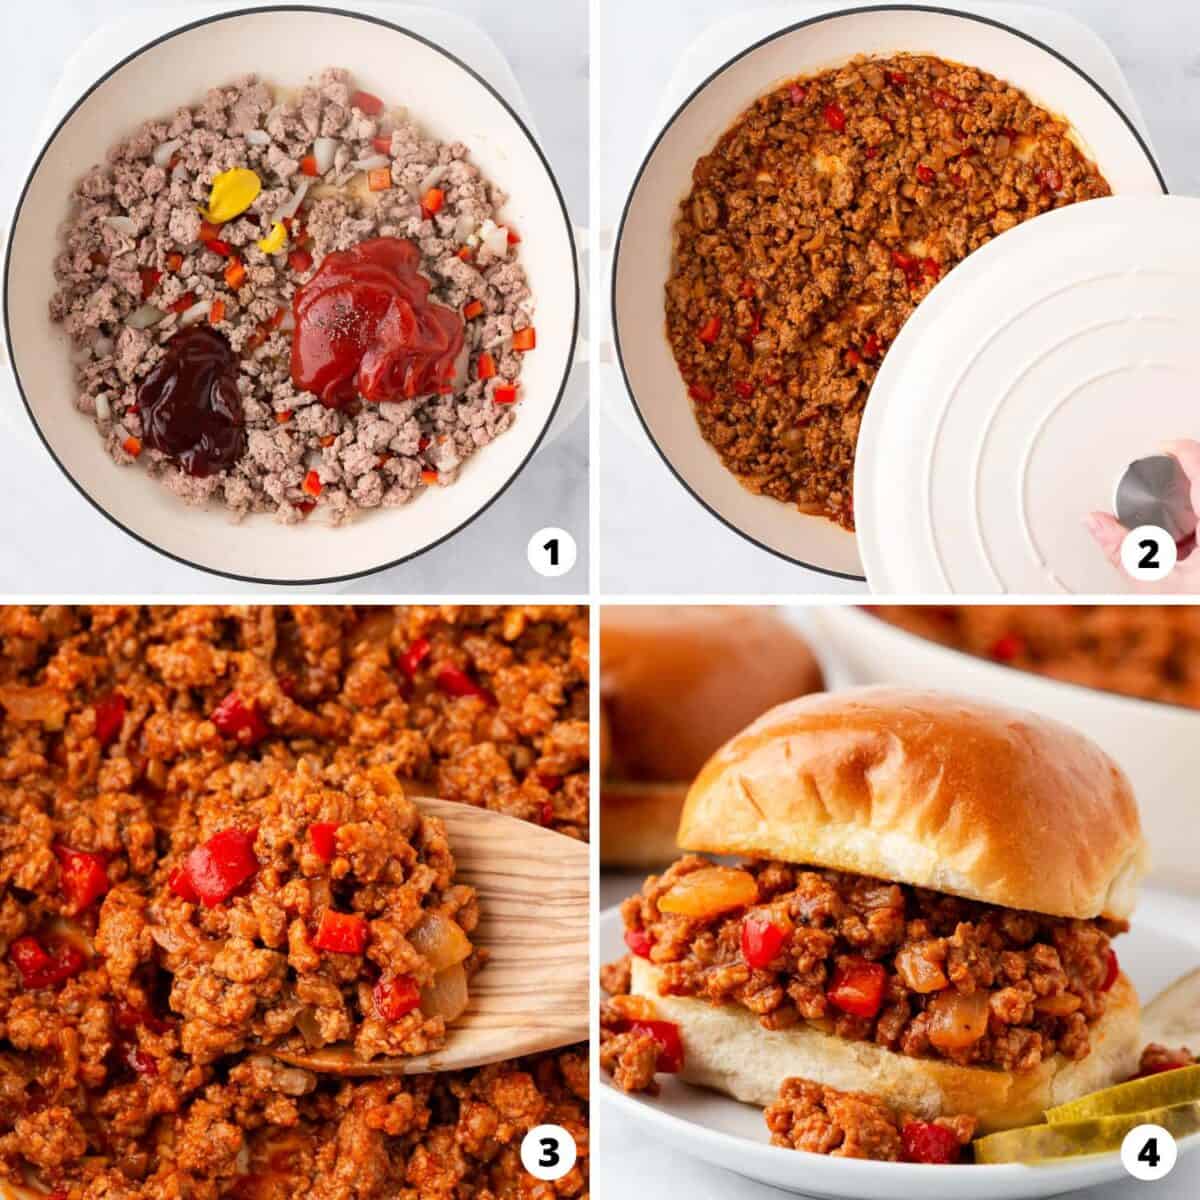 Showing how to make a sloppy joe in a 4 step collage. 